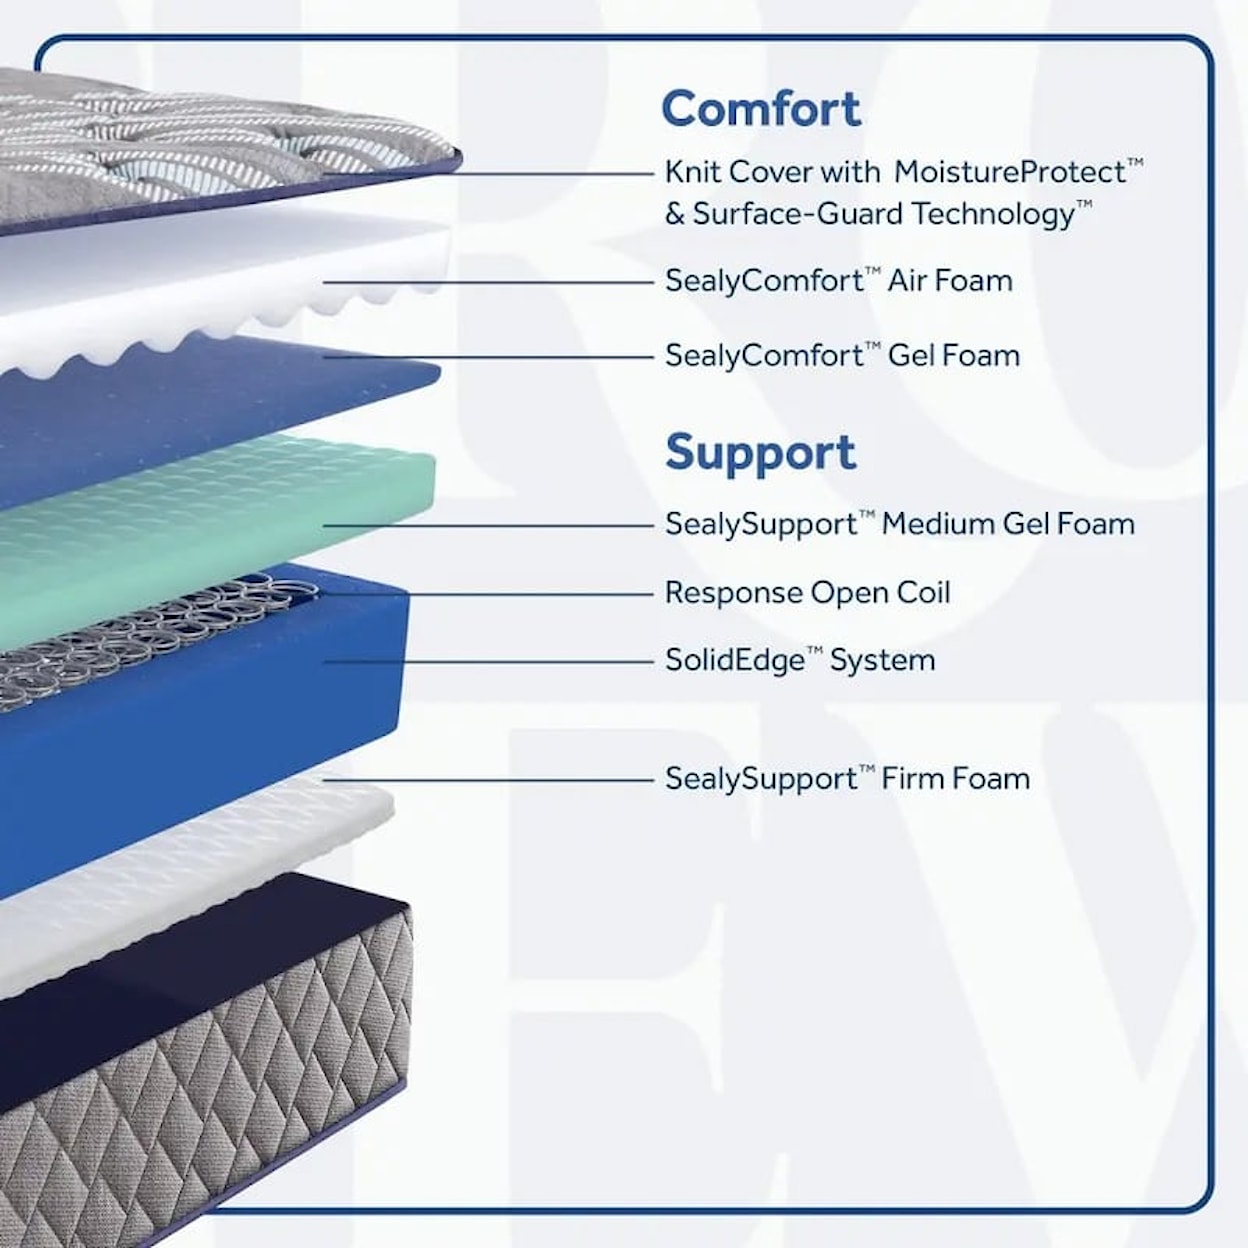 Sealy Sealy Crown Jewel Opal House Firm Double Mattress